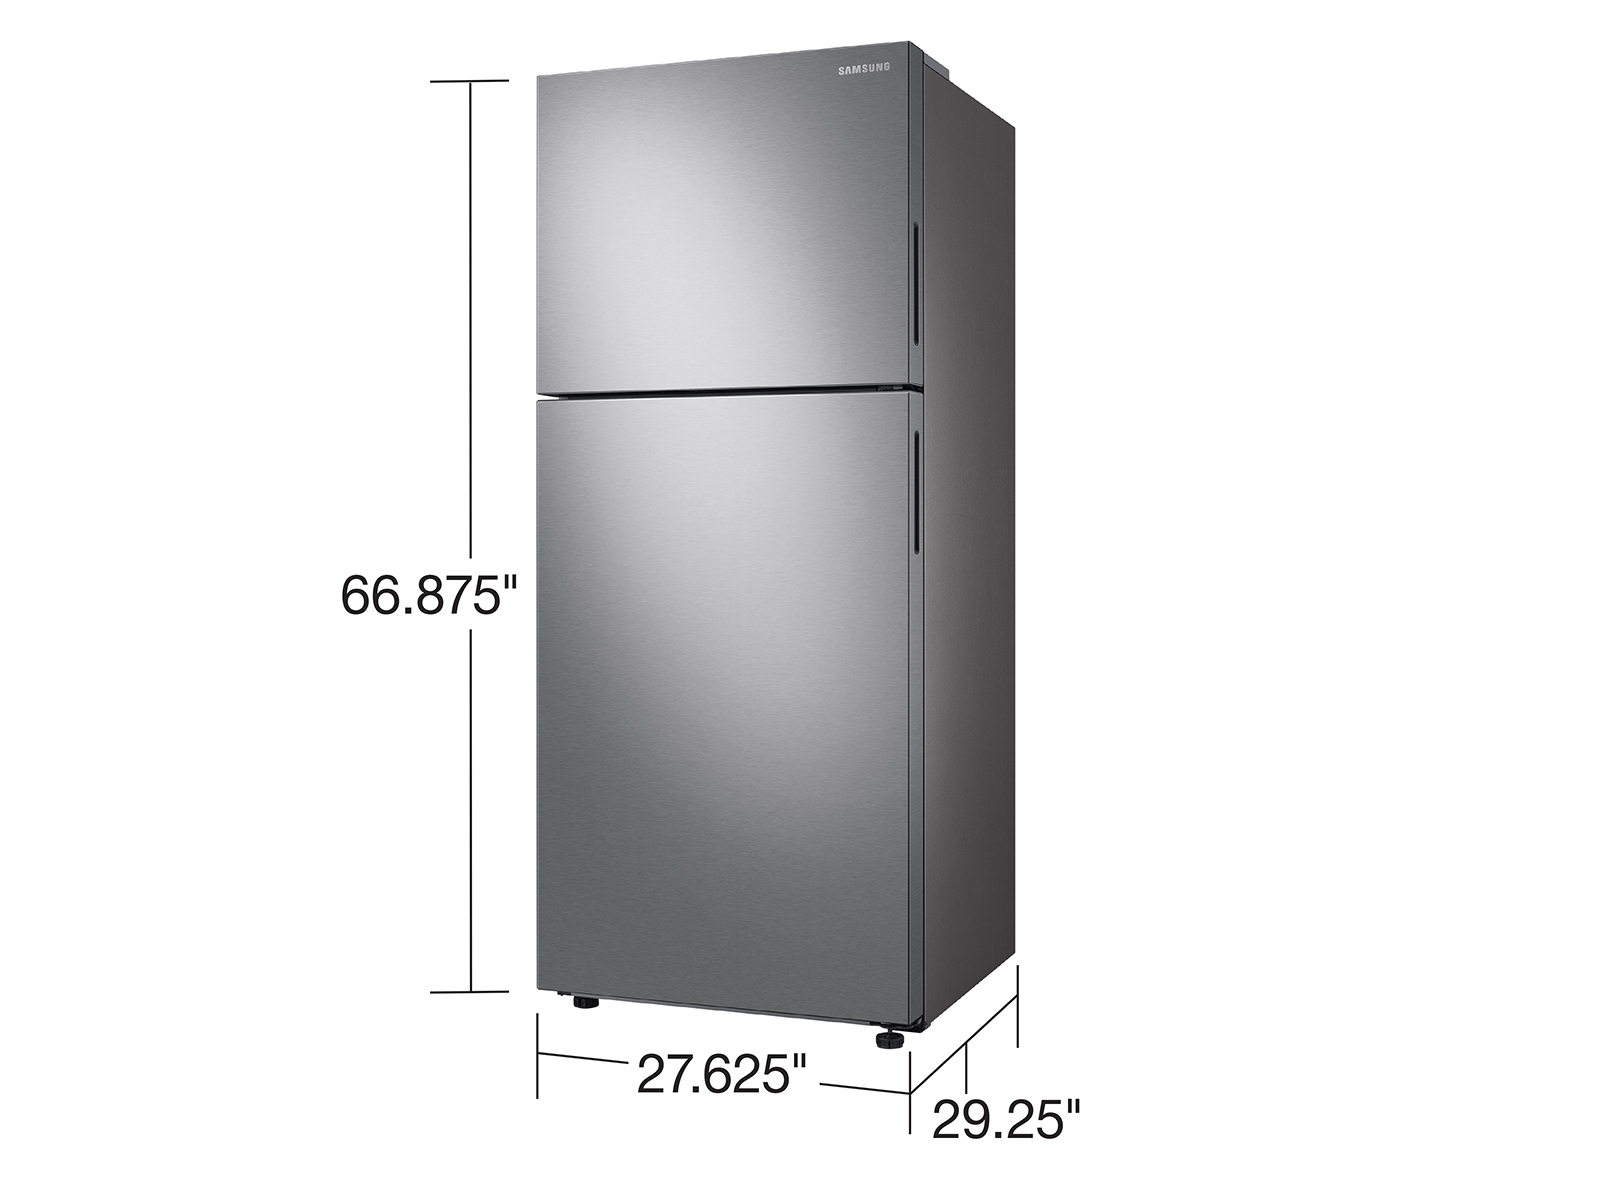 Thumbnail image of 15.6 cu. ft. Top Freezer Refrigerator with All-Around Cooling in Stainless Steel